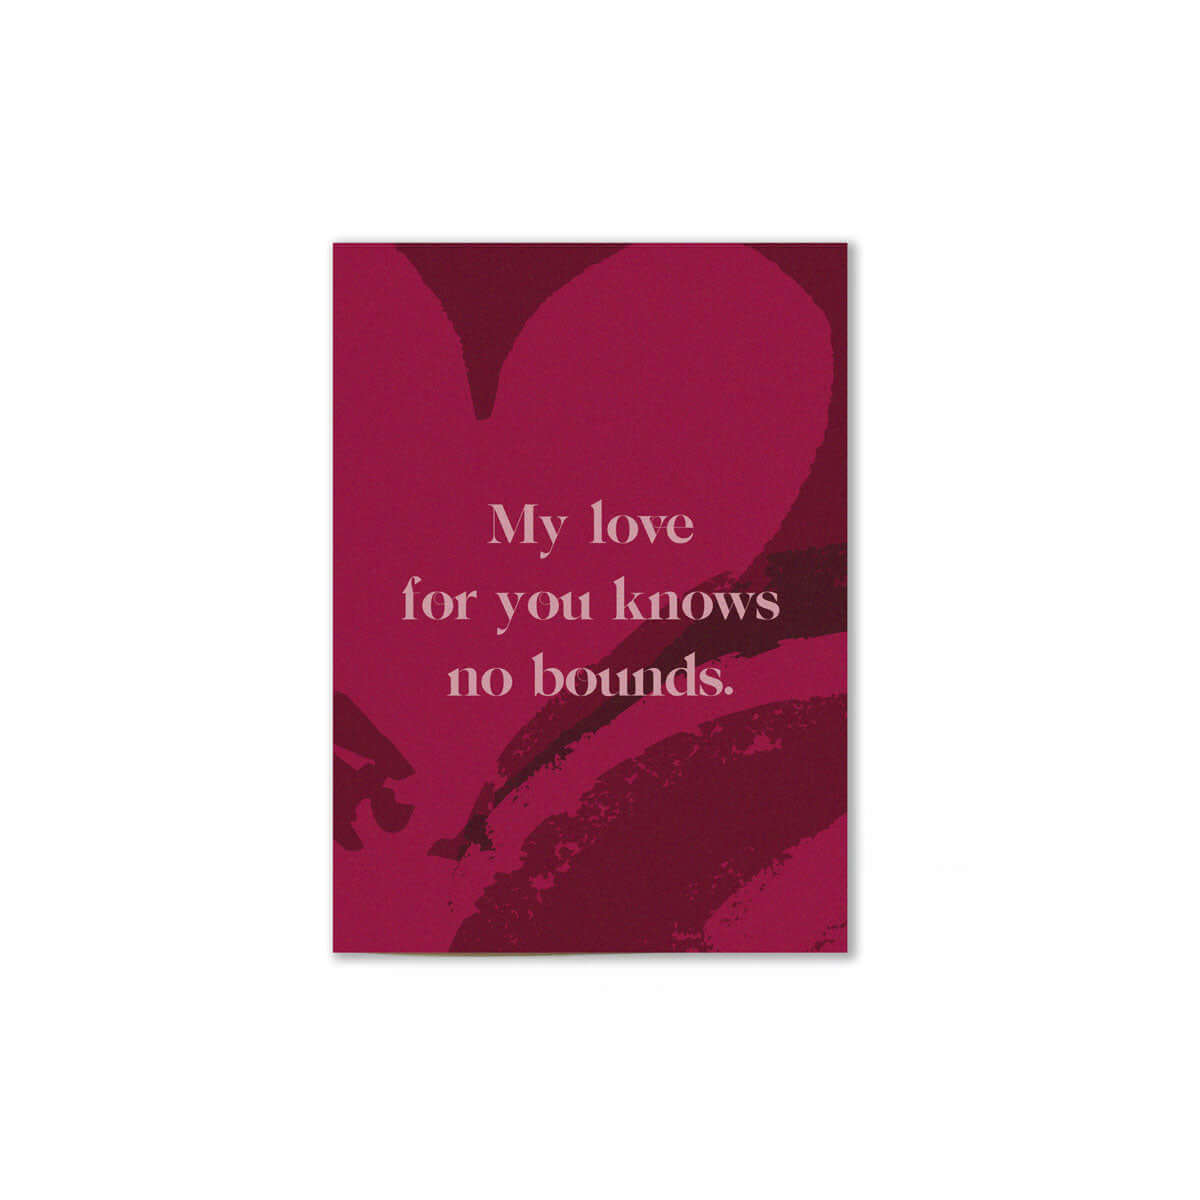 pink card with heart design on cover that reads "My love for you knows no bounds". 